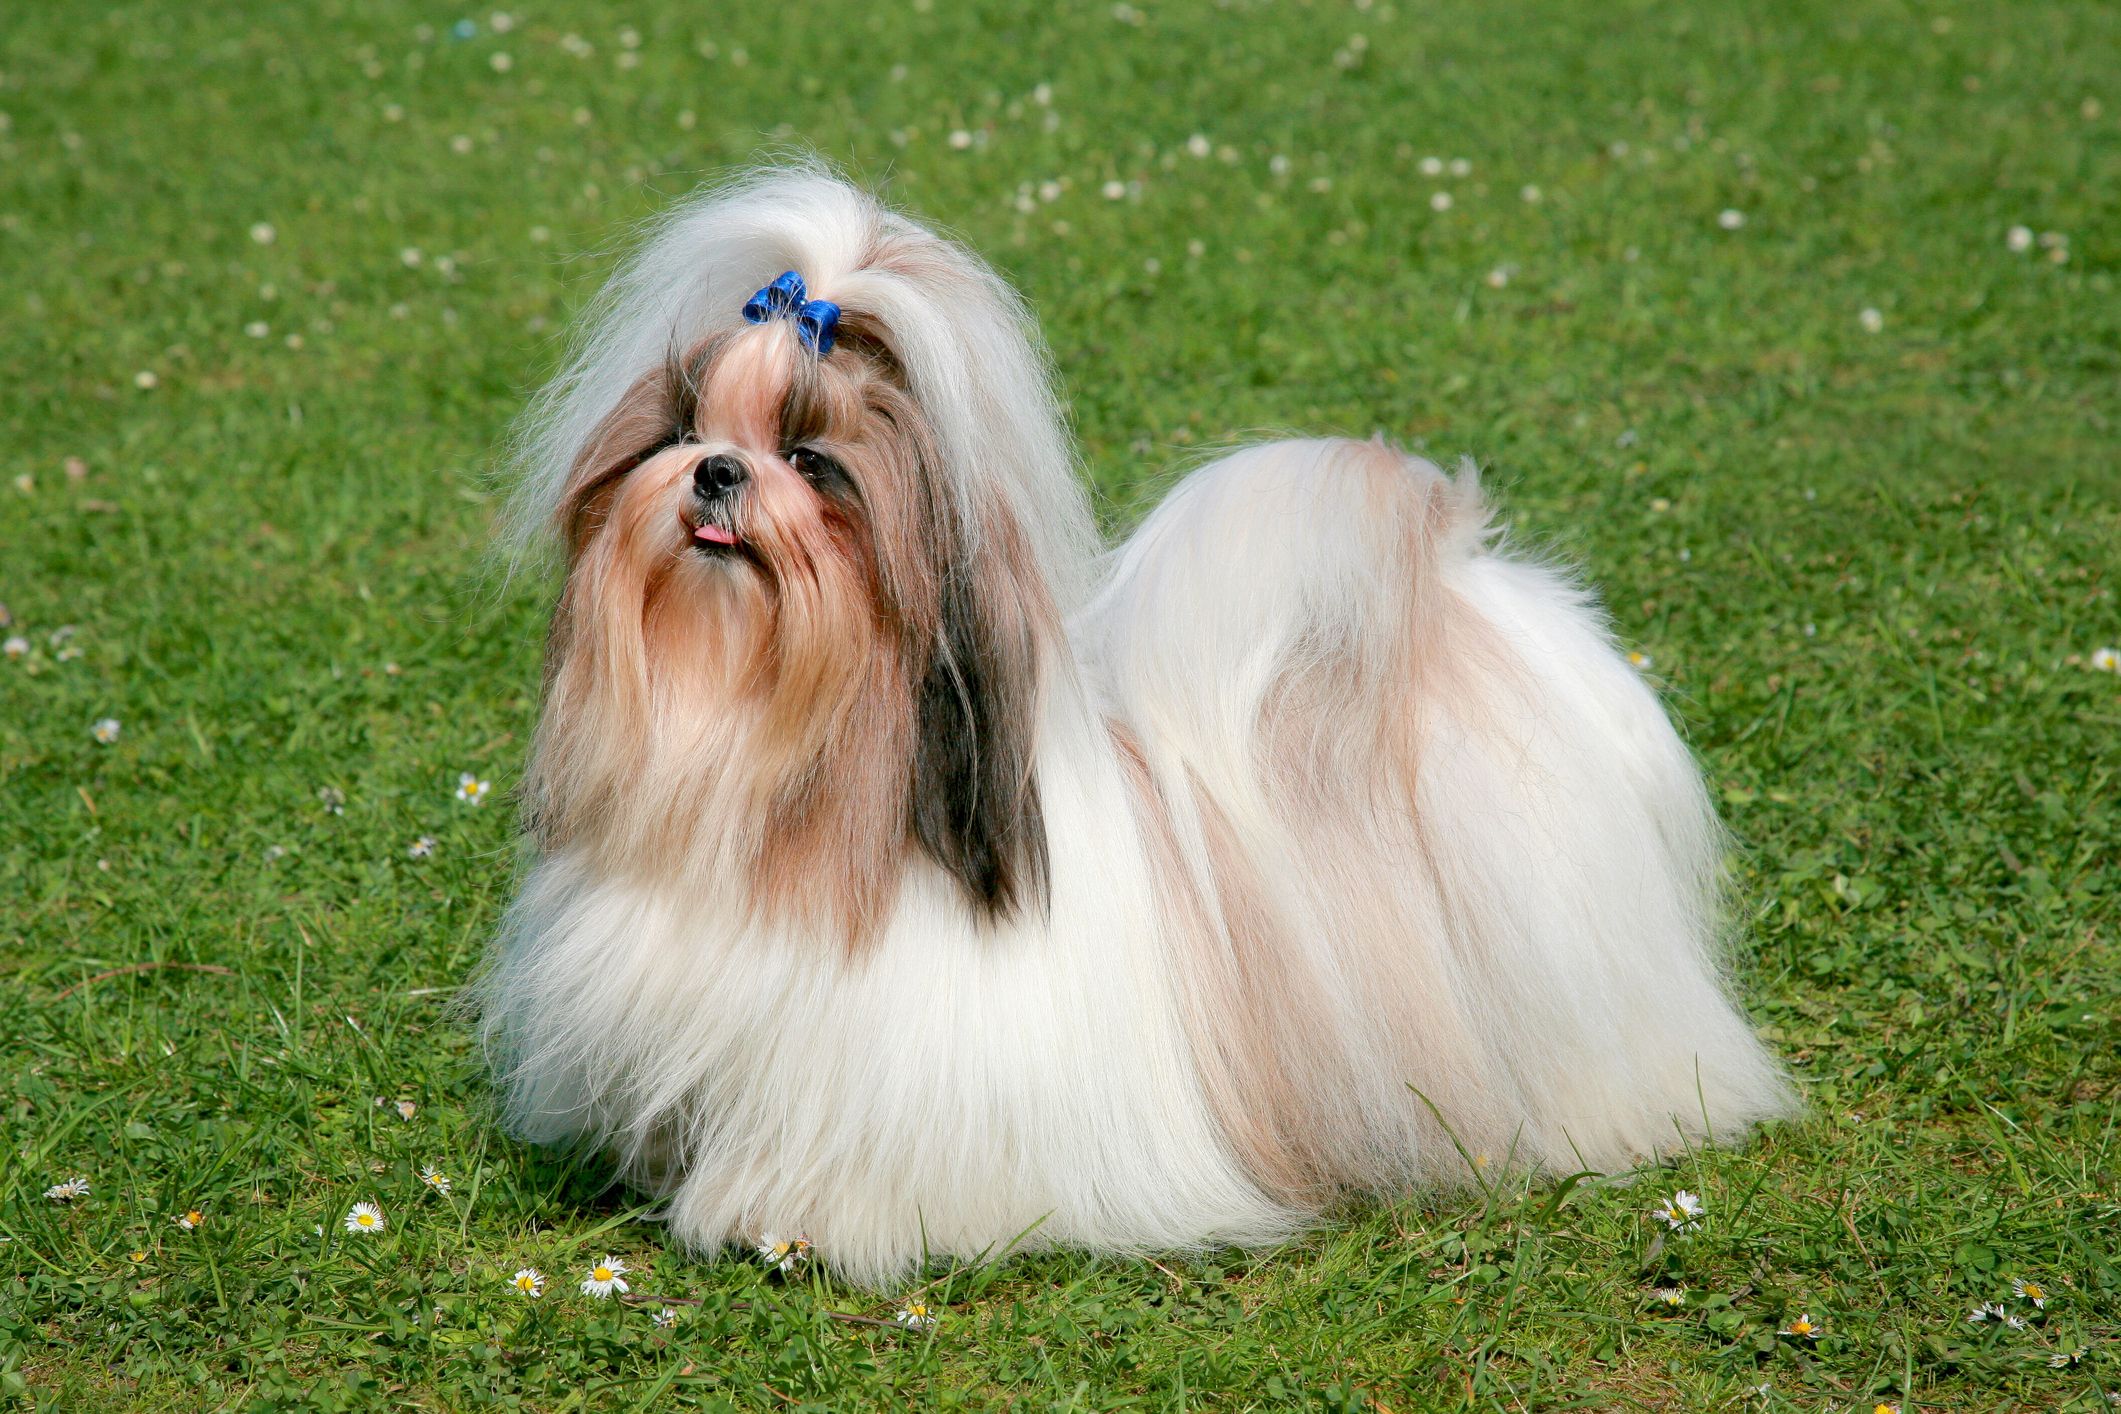 16 Best Dogs That Stay Small: Yorkie, Chihuahua, Maltese and More